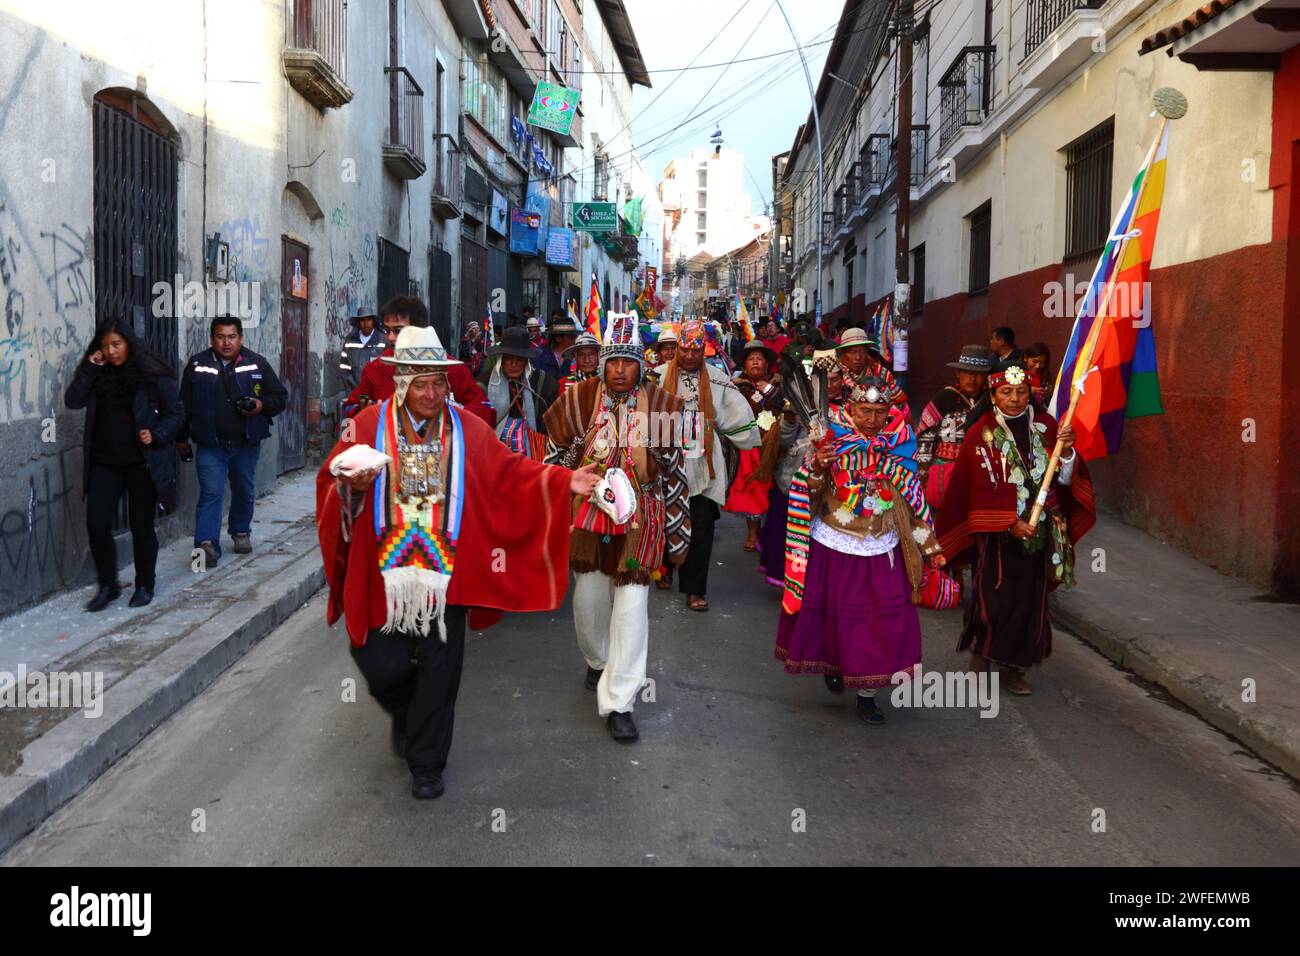 La Paz, BOLIVIA; 24th January 2015. Aymara shamans carrying conch shells walks in front of an ancient illa (or statue) of an Ekeko (an Aymara god of abundance) as it is paraded through the streets of La Paz to celebrate its first appearance at the Alasitas festival, which starts today. The statue is around 2000 years old and was made by the Pucara culture. It was taken from the archaeological site of Tiwanaku to Switzerland in 1858, and returned to Bolivia by the Berne History Museum in November 2014. Stock Photo